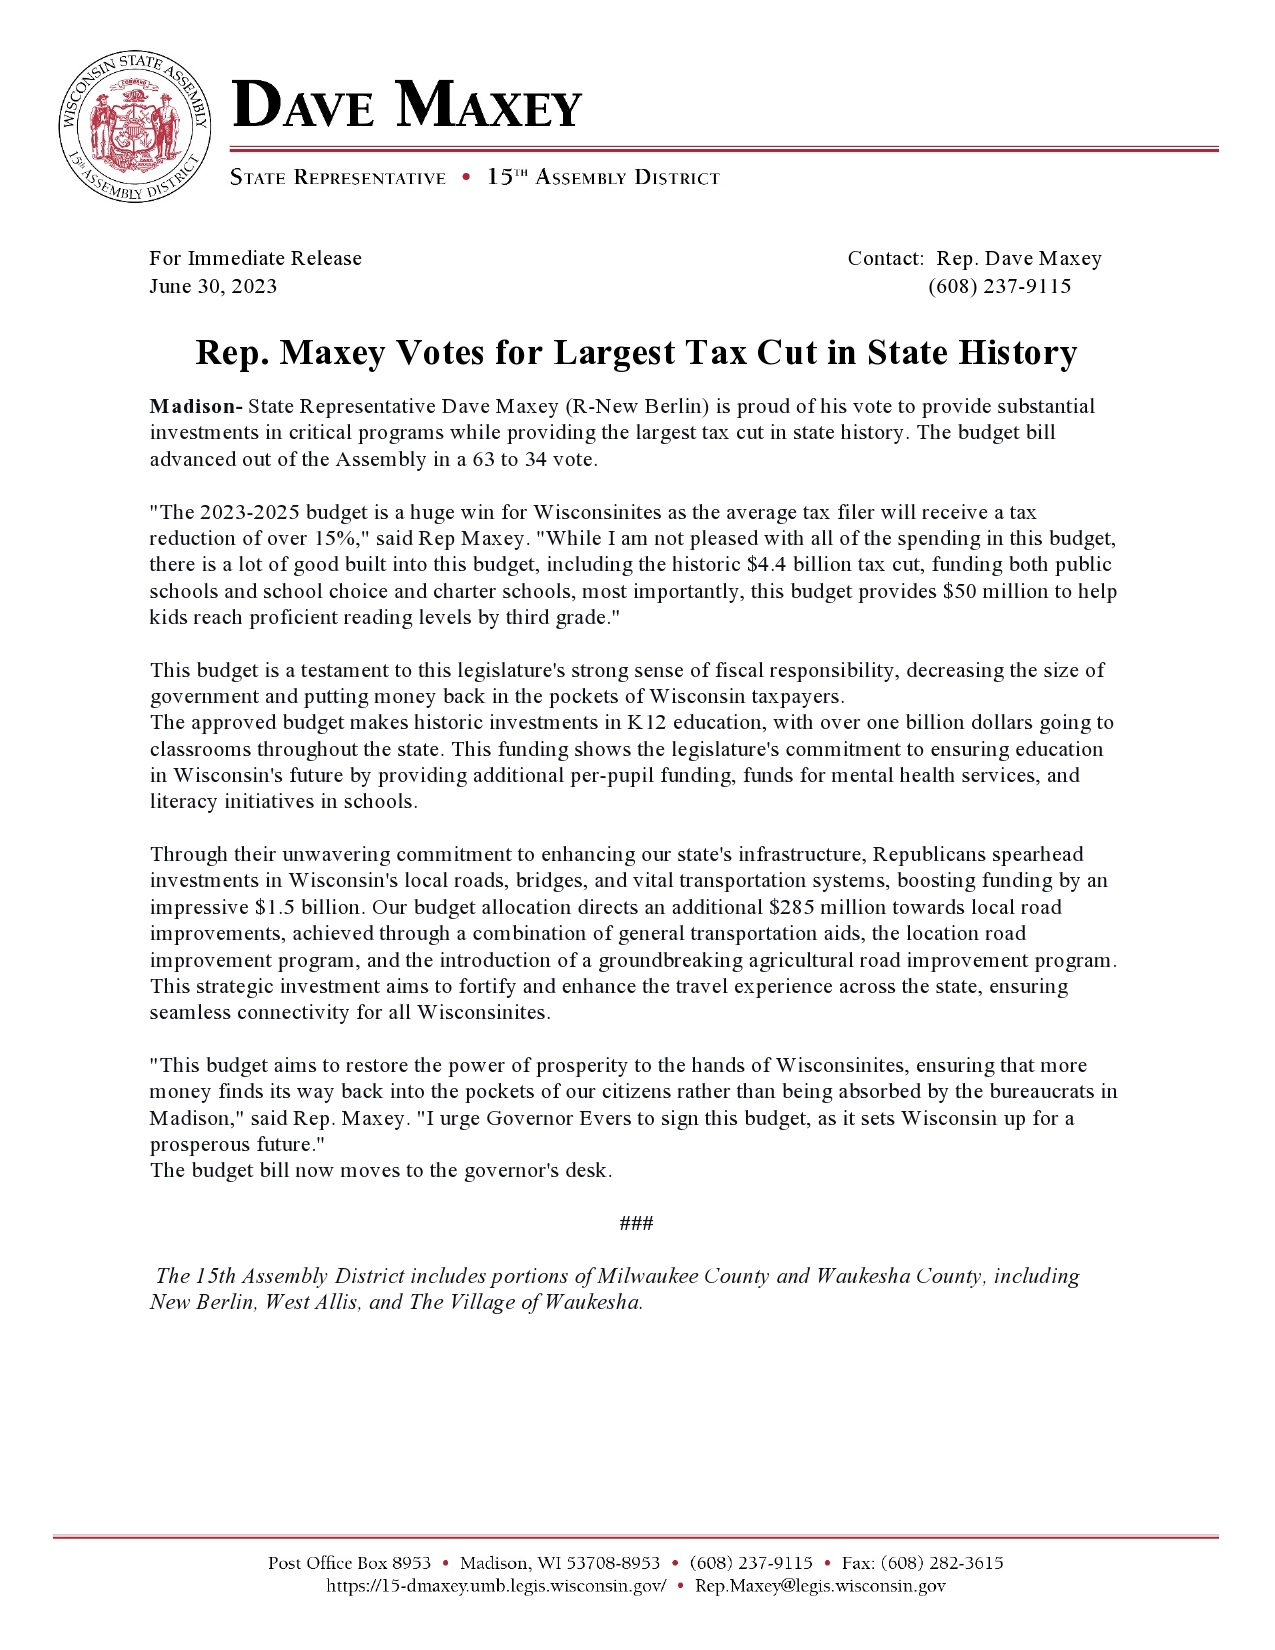 Rep. Maxey Statements on the 2023-2025 Budget